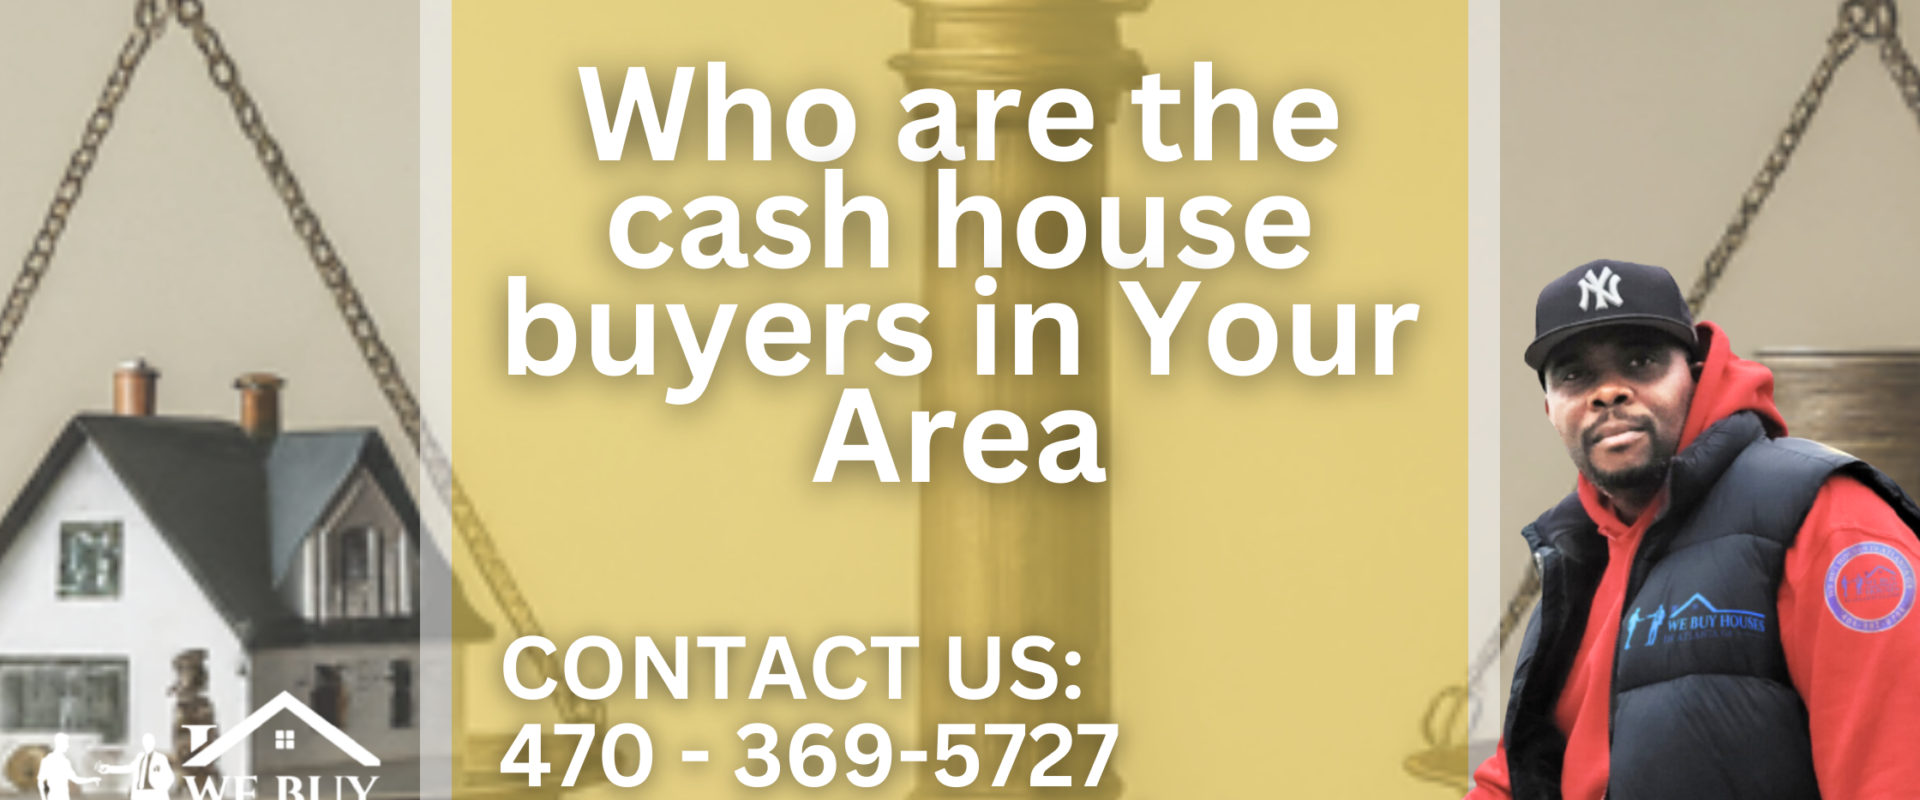 Who-are-the-cash-house-buyers-in-Your-Area